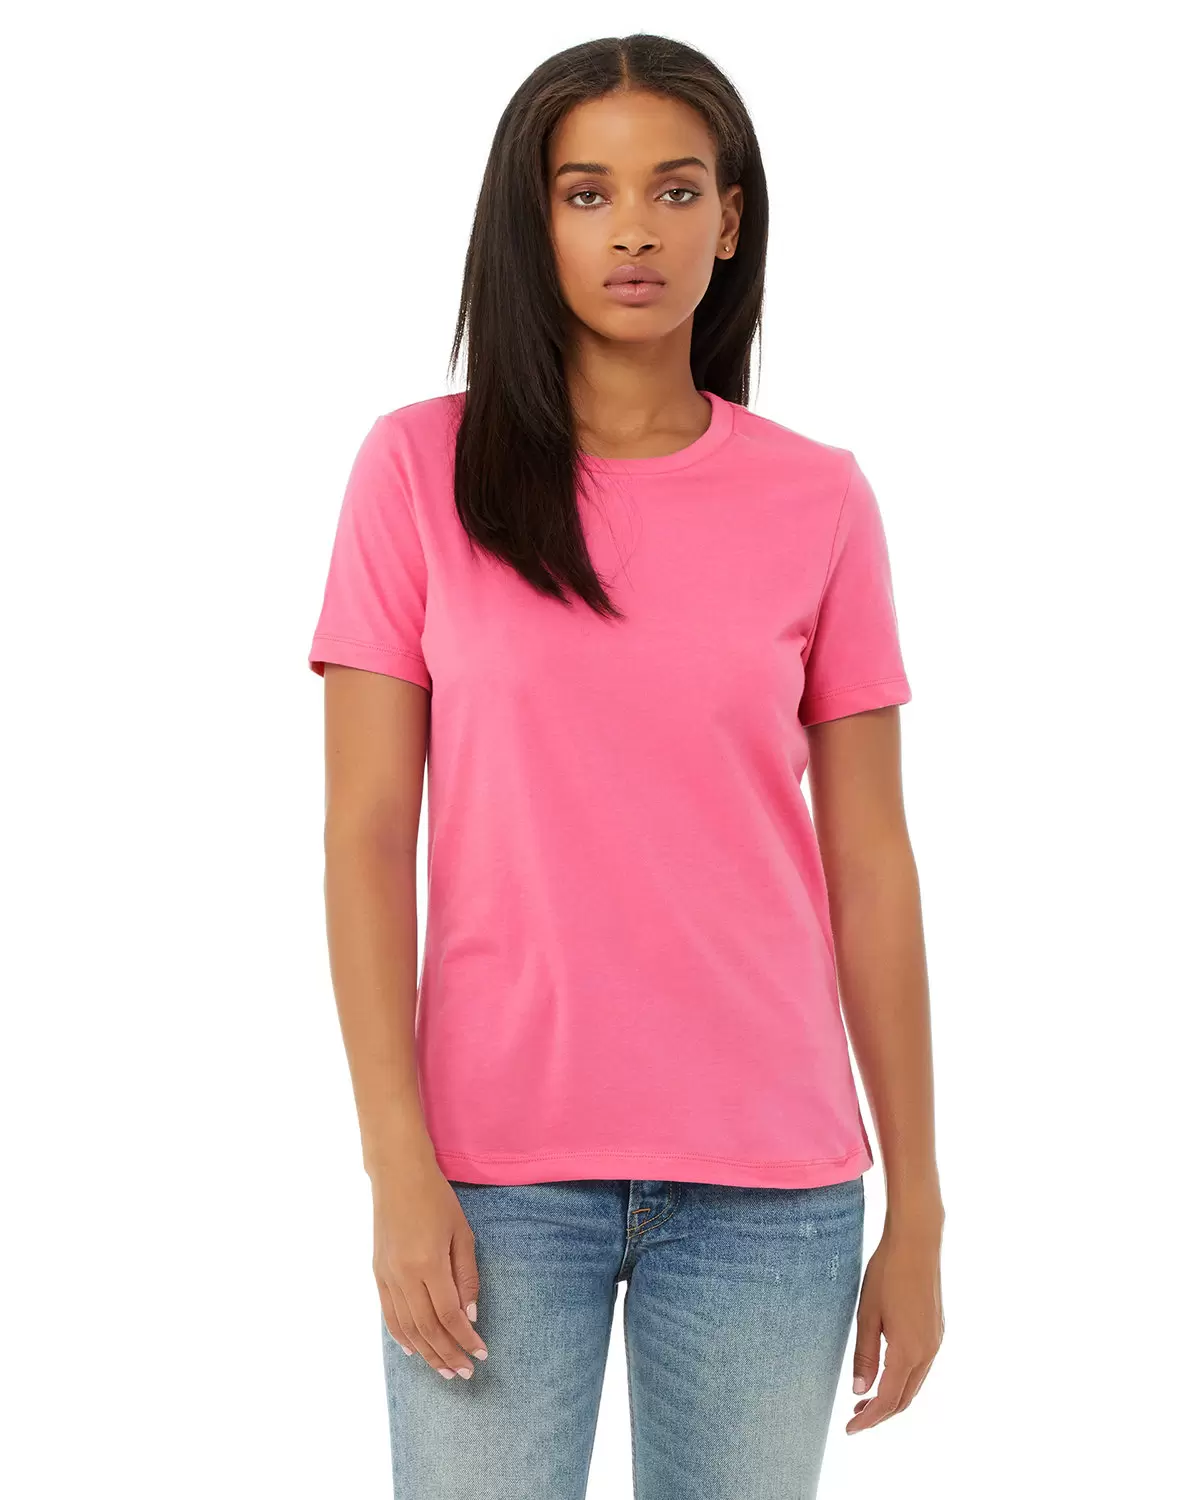 Bella + Canvas 6400 Womens Relaxed Short Cotton Jersey Tee - From $5.18